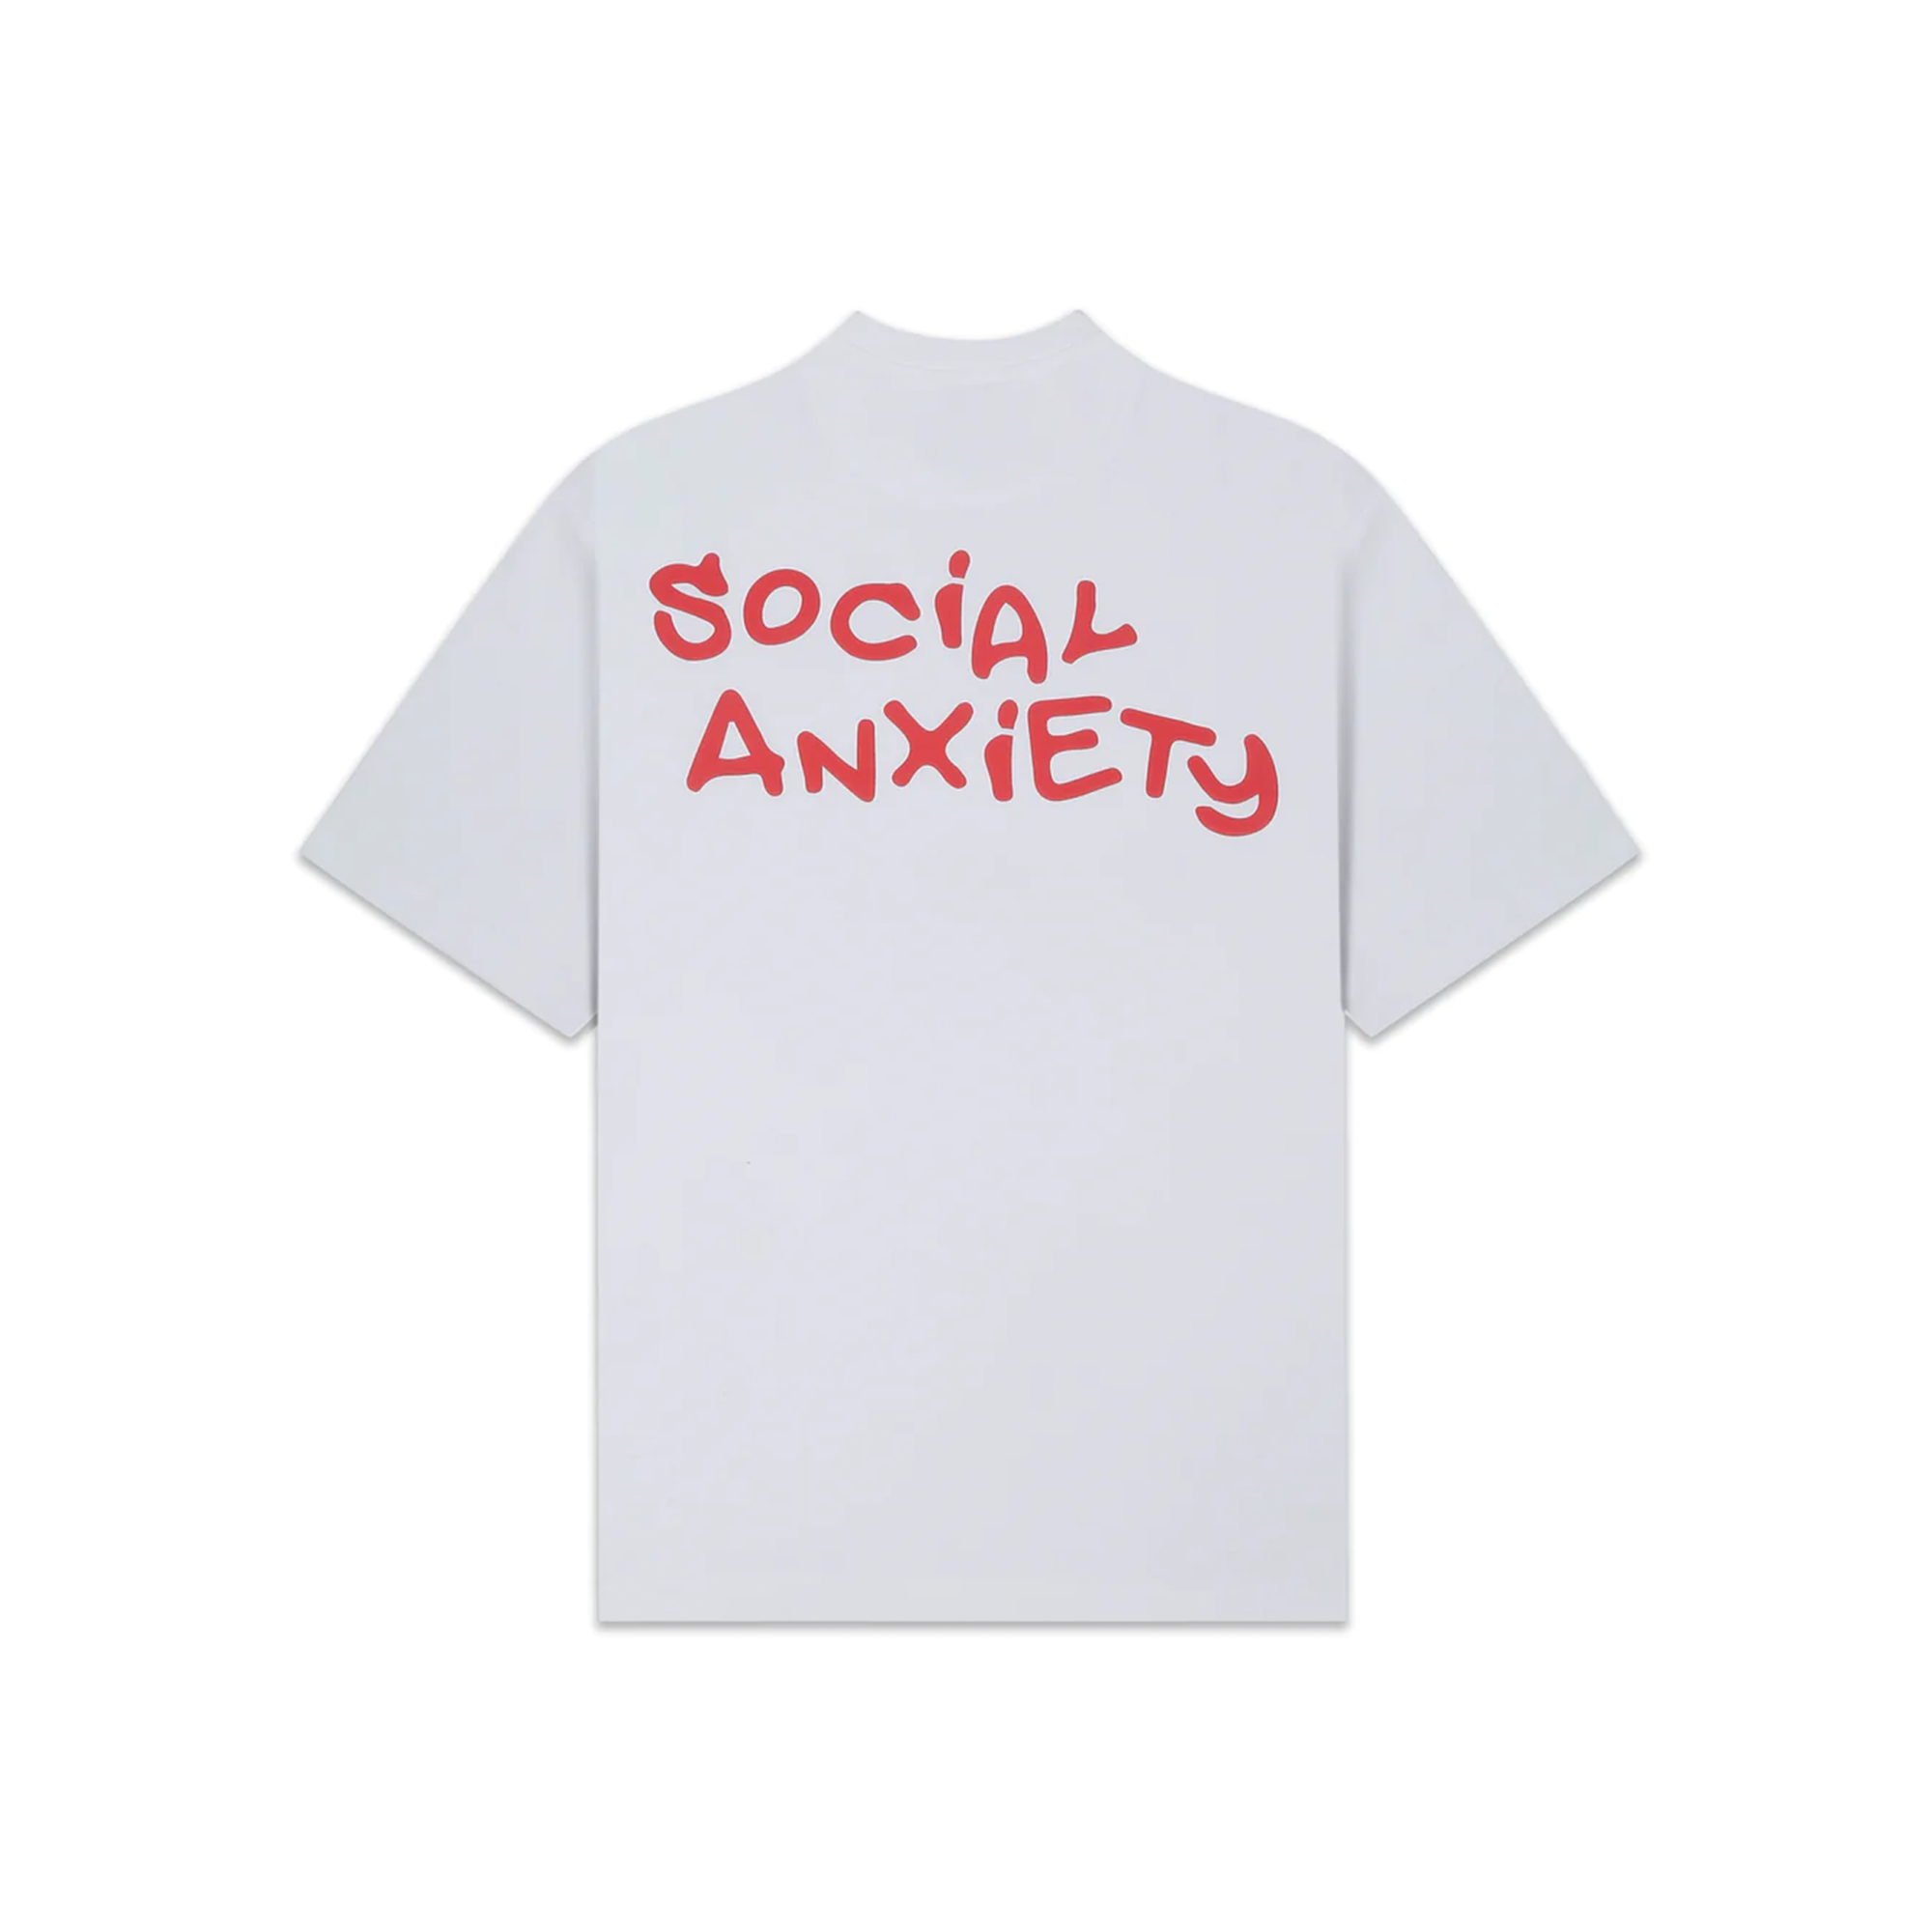 TOO SOBER & SOCIAL ANXIETY WHITE T-SHIRT